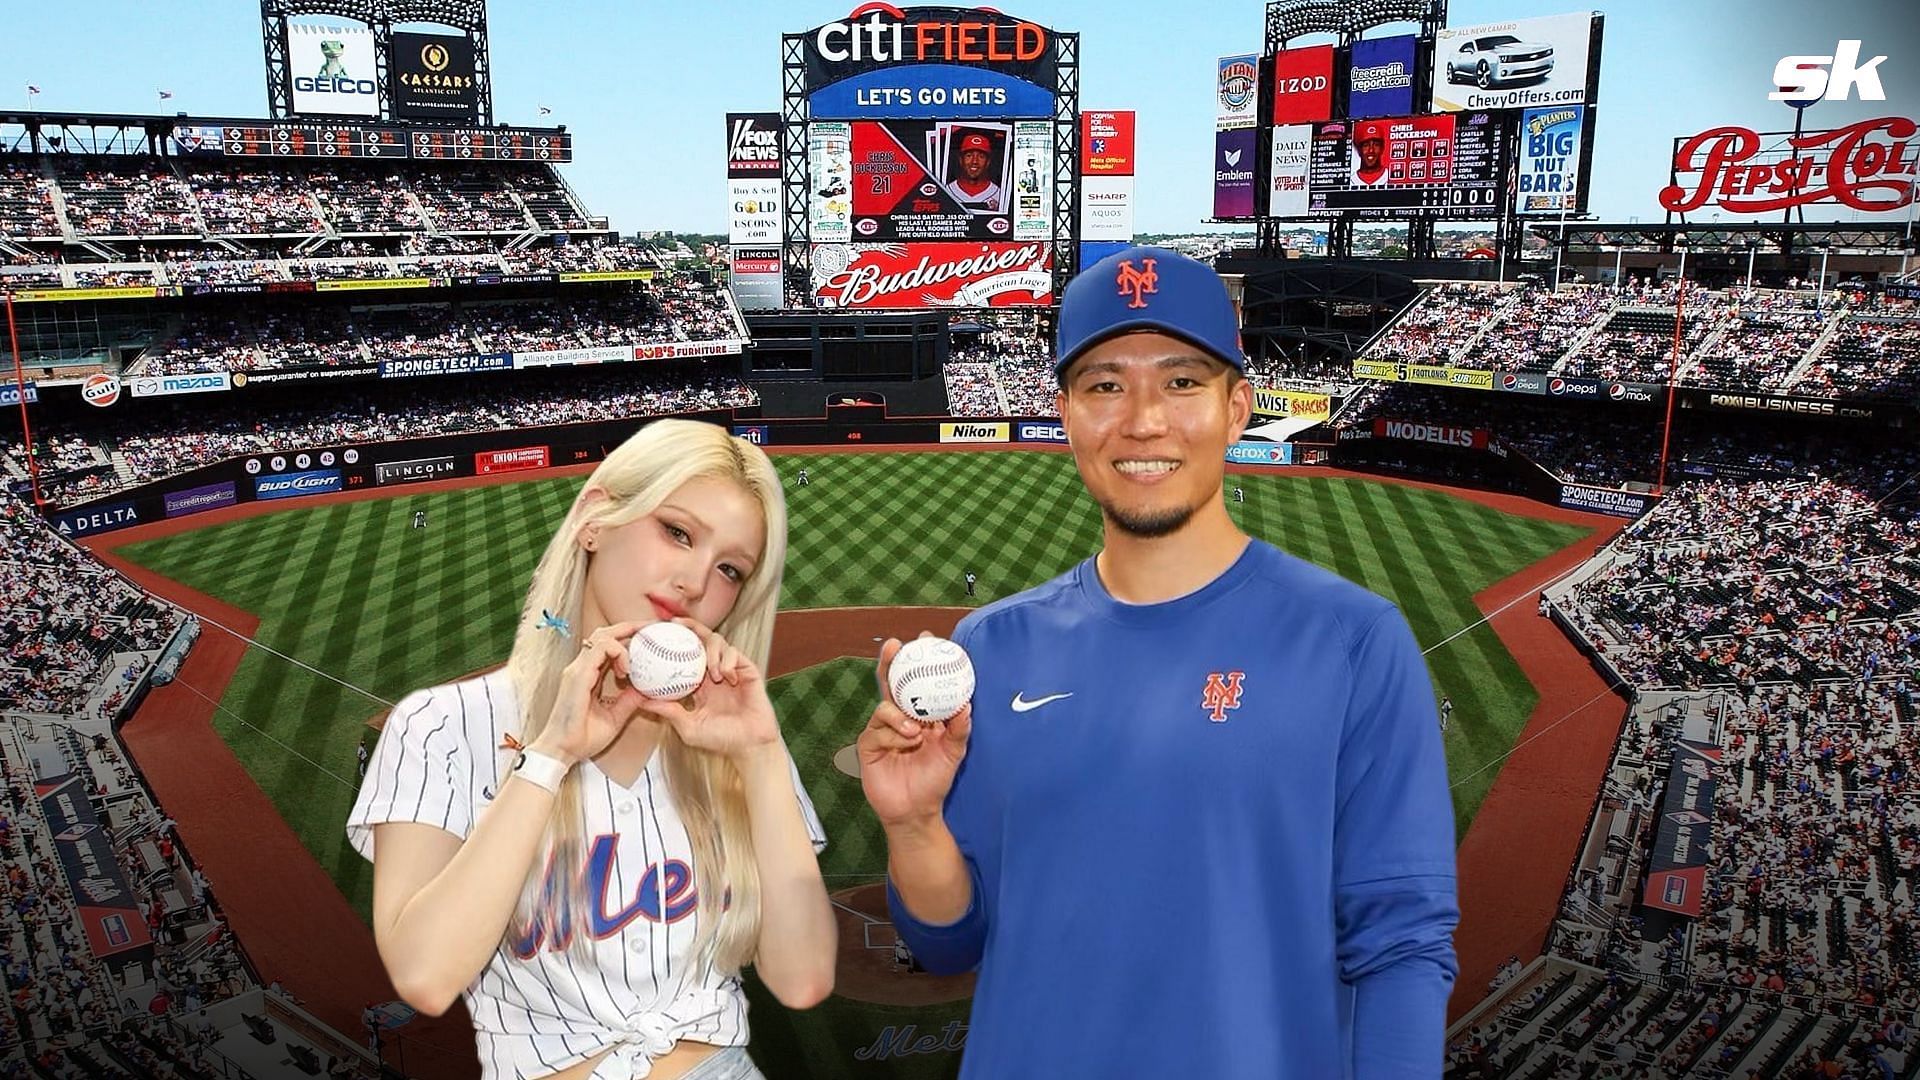 Mets fans seem to believe that the ethnicities of Kodai Senga and Jeon Somi put them at odds